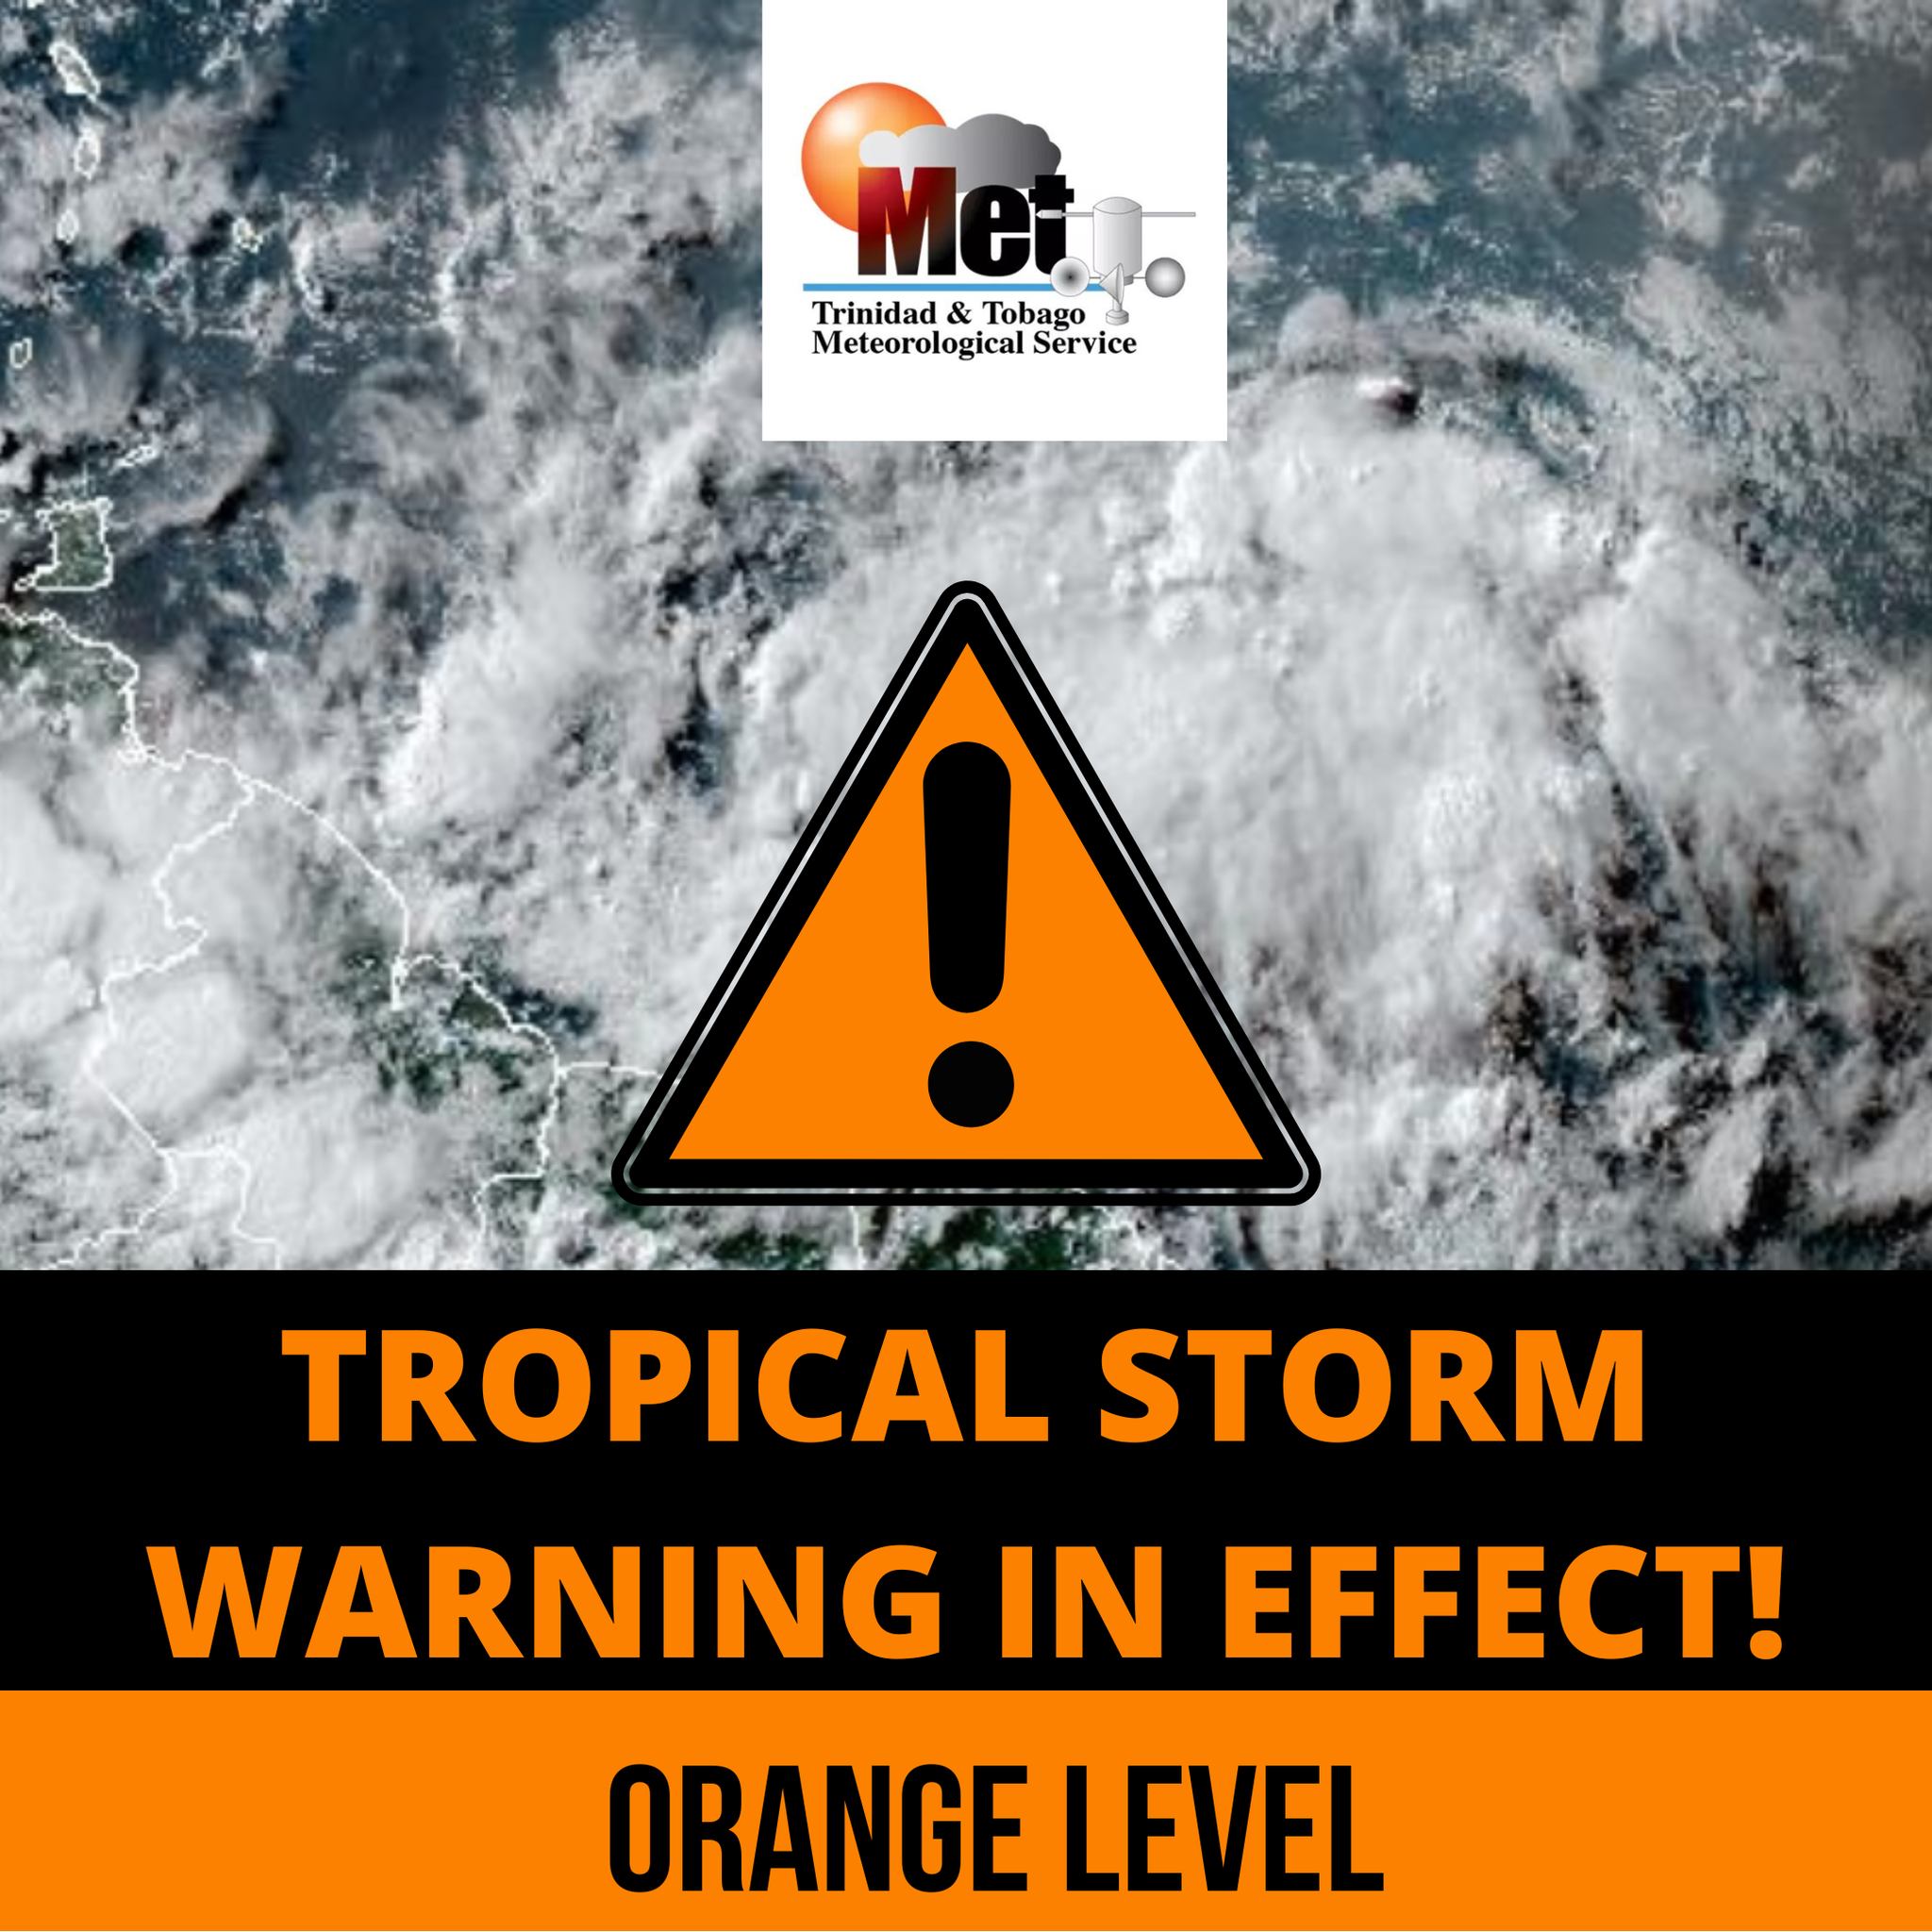 Tropical storm warning in effect for T&T